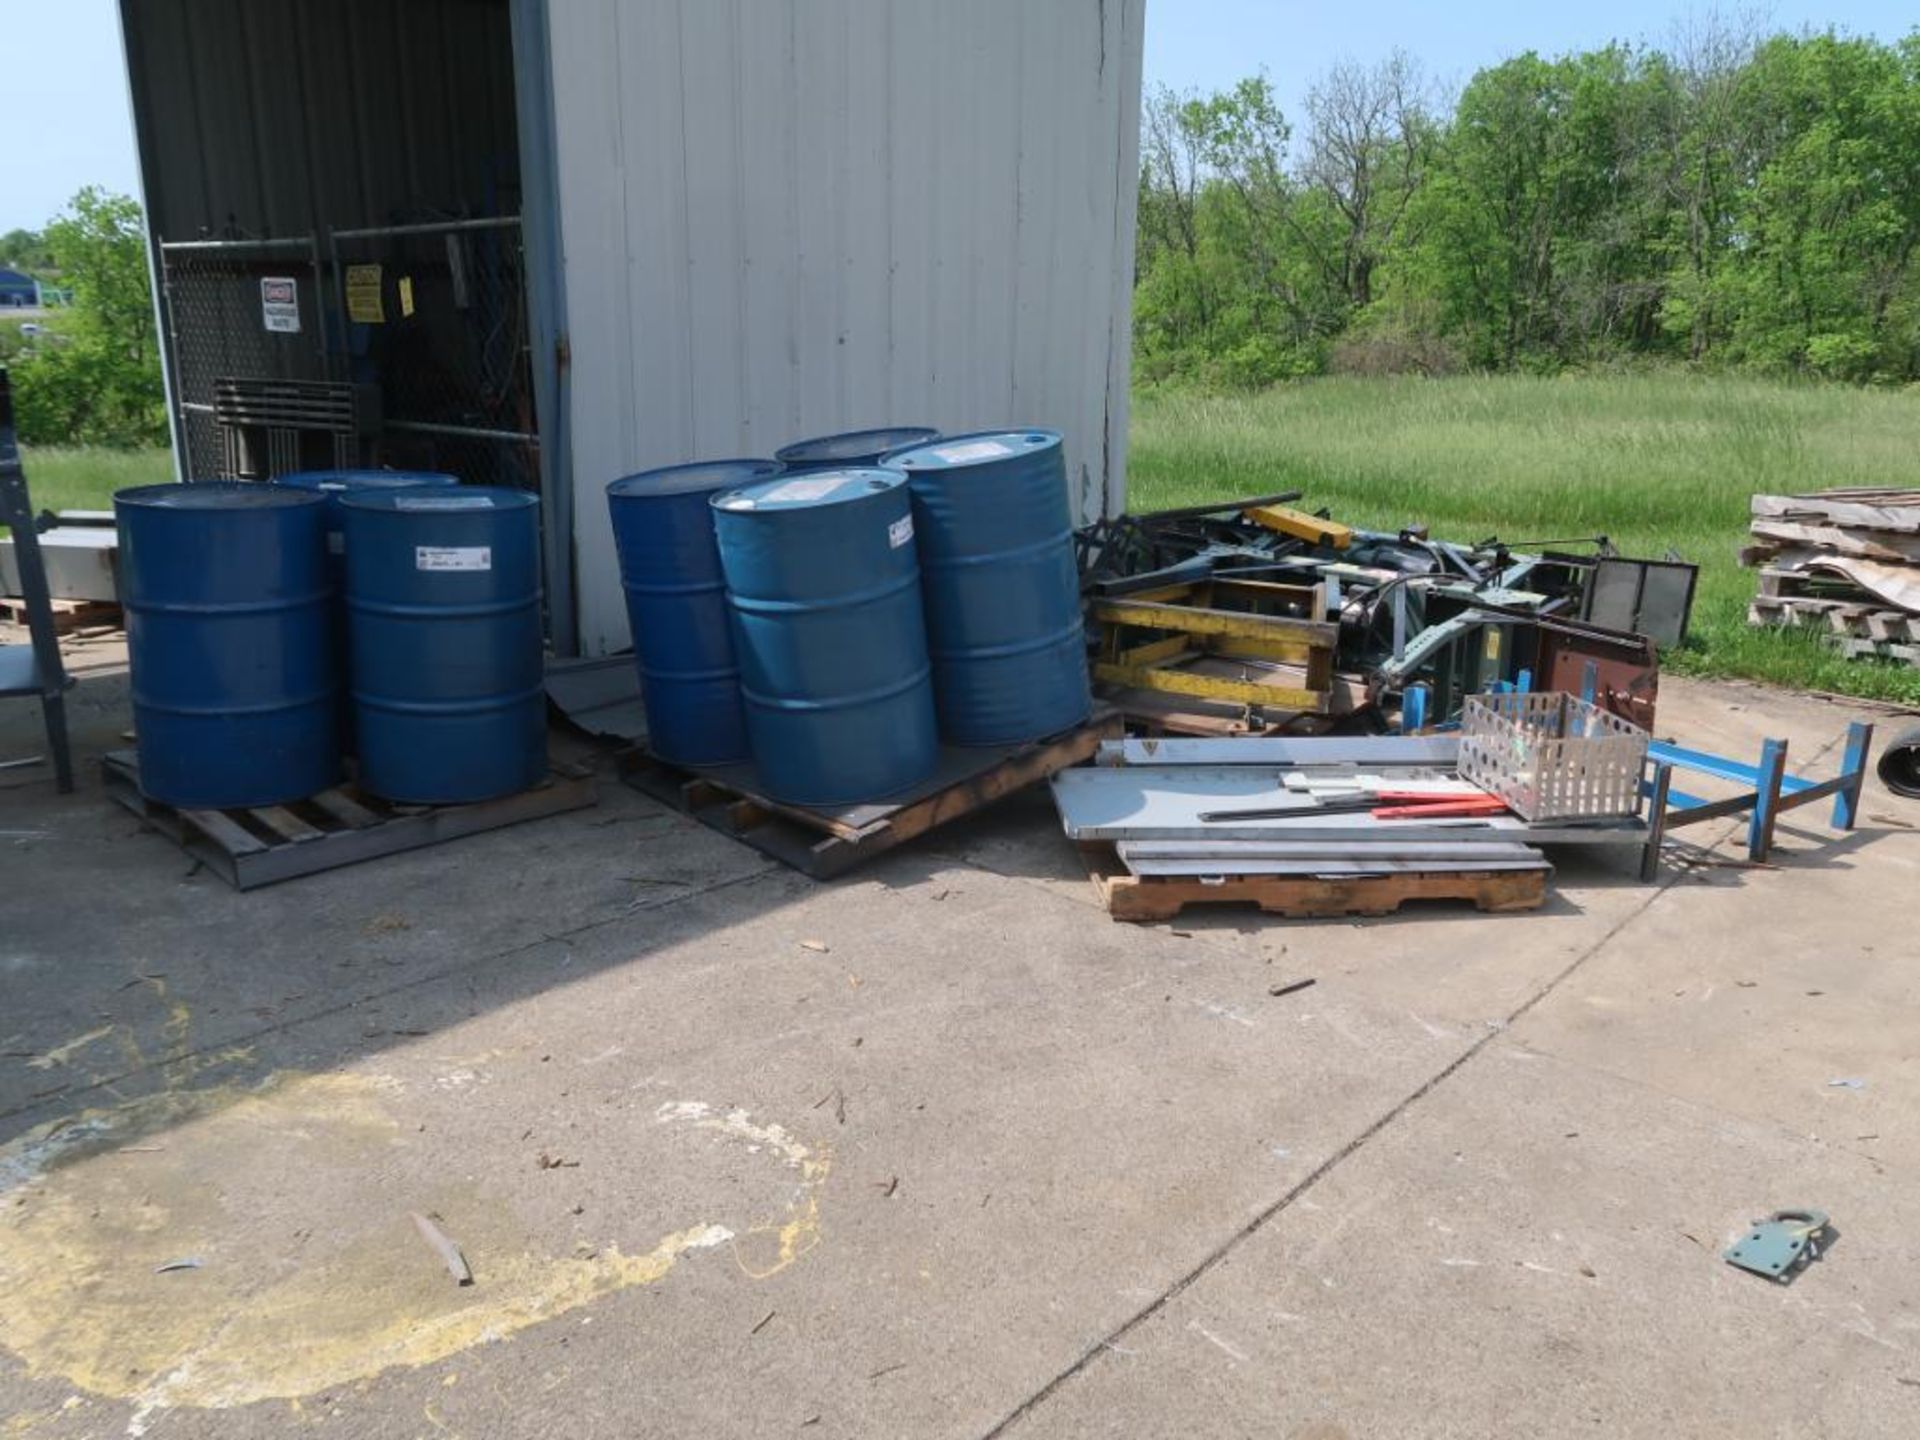 LOT: Scrap (LOCATED OUTSIDE, REAR OF BUILDING) (LOCATION: 39 PEARCE INDUSTRIAL RD., SHELBYVILLE, - Image 2 of 2